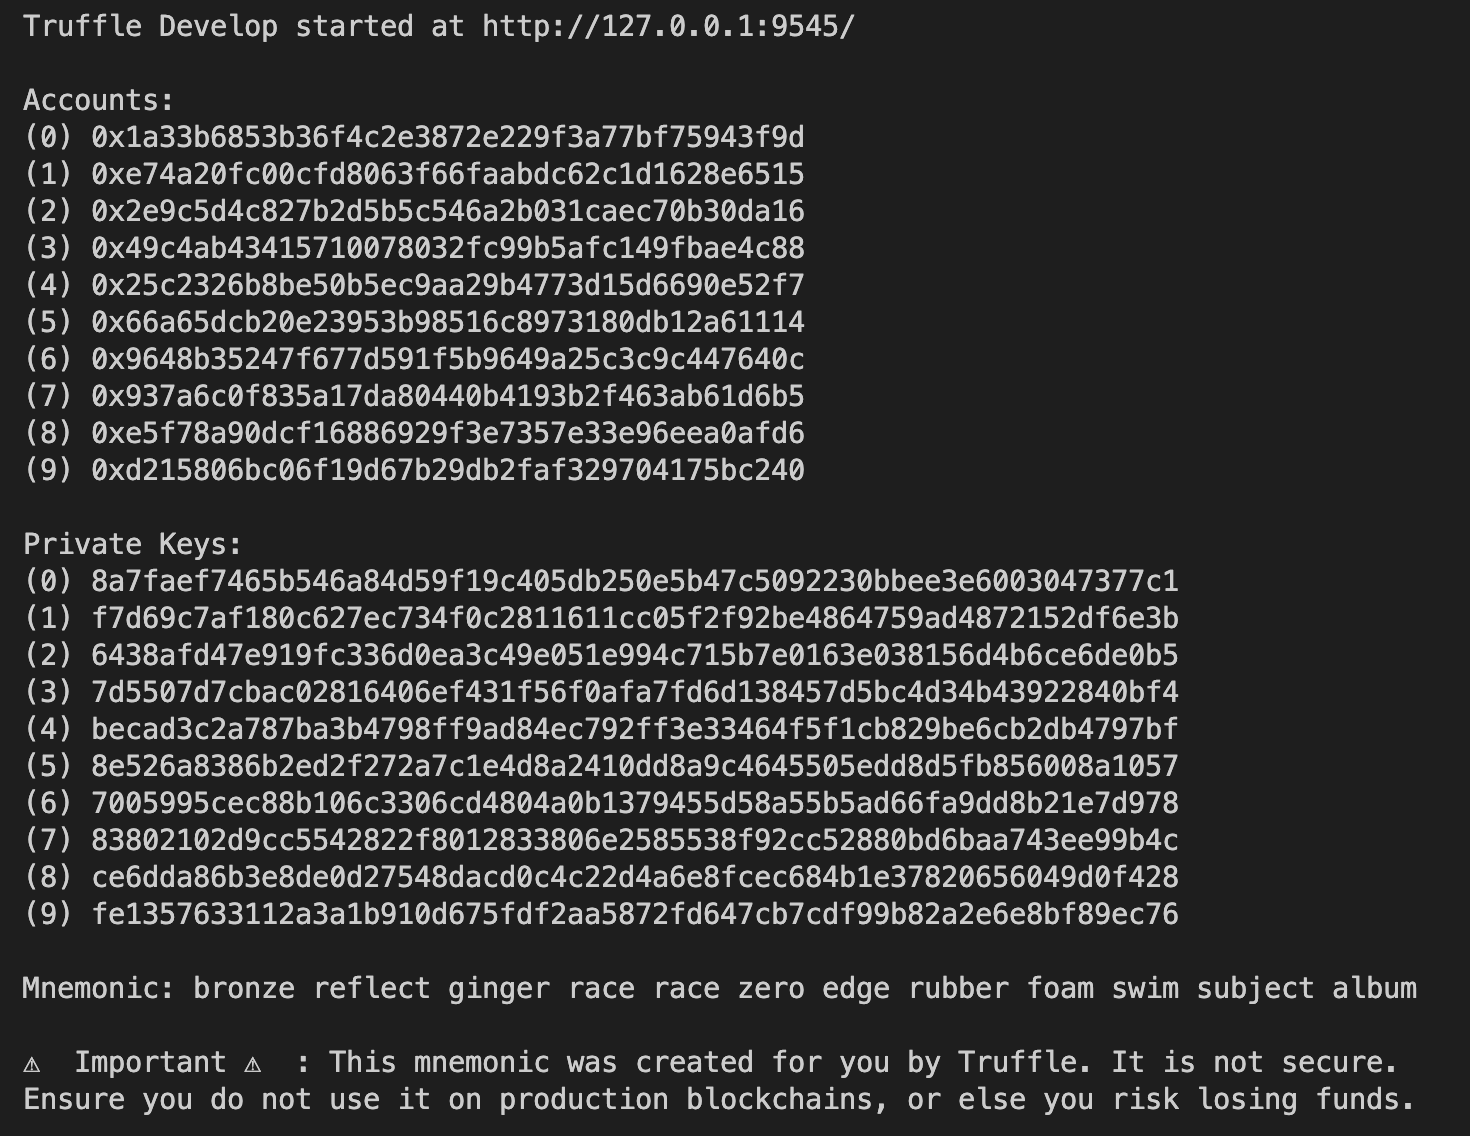 Image of the output from Truffle develop command